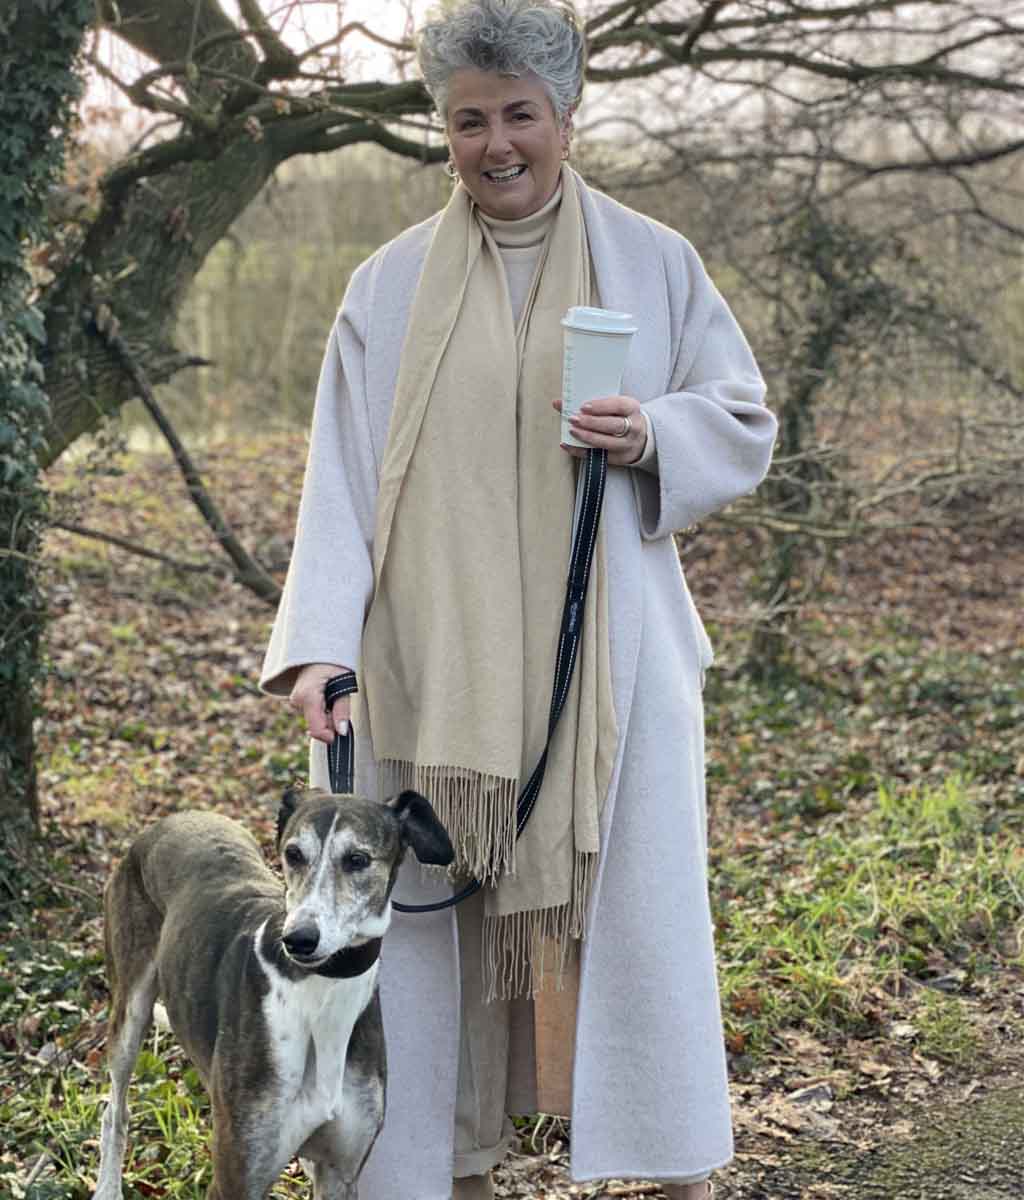 Photo showing Maxine Laceby standing outside by a tree, she is smiling and wearing a long cream coat and holding a reusable coffee cup, and her lurcher Rosie is standing by her